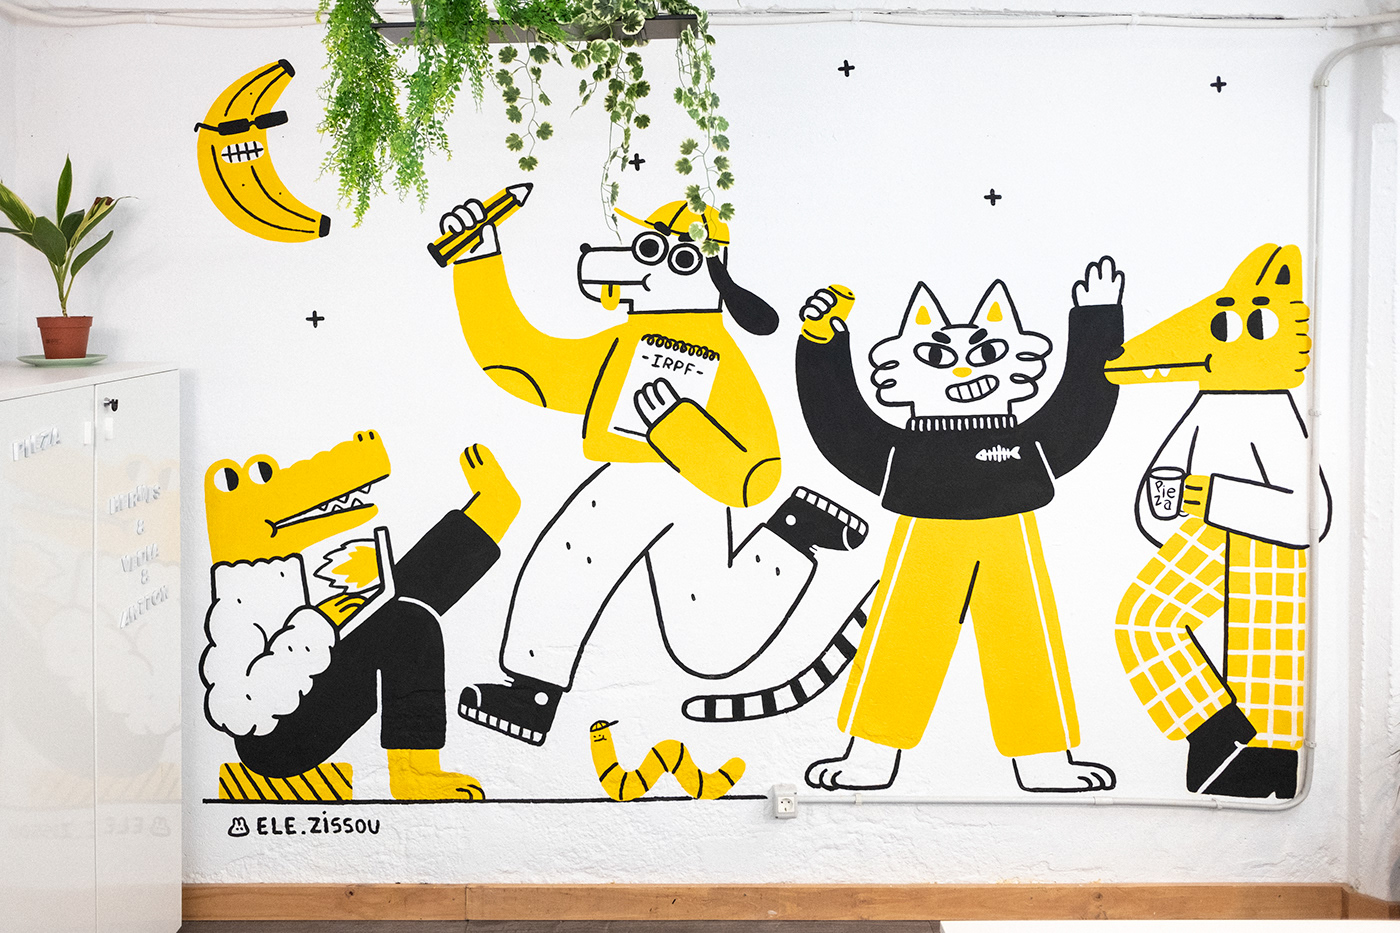 Character design  ILLUSTRATION  Mural painting  